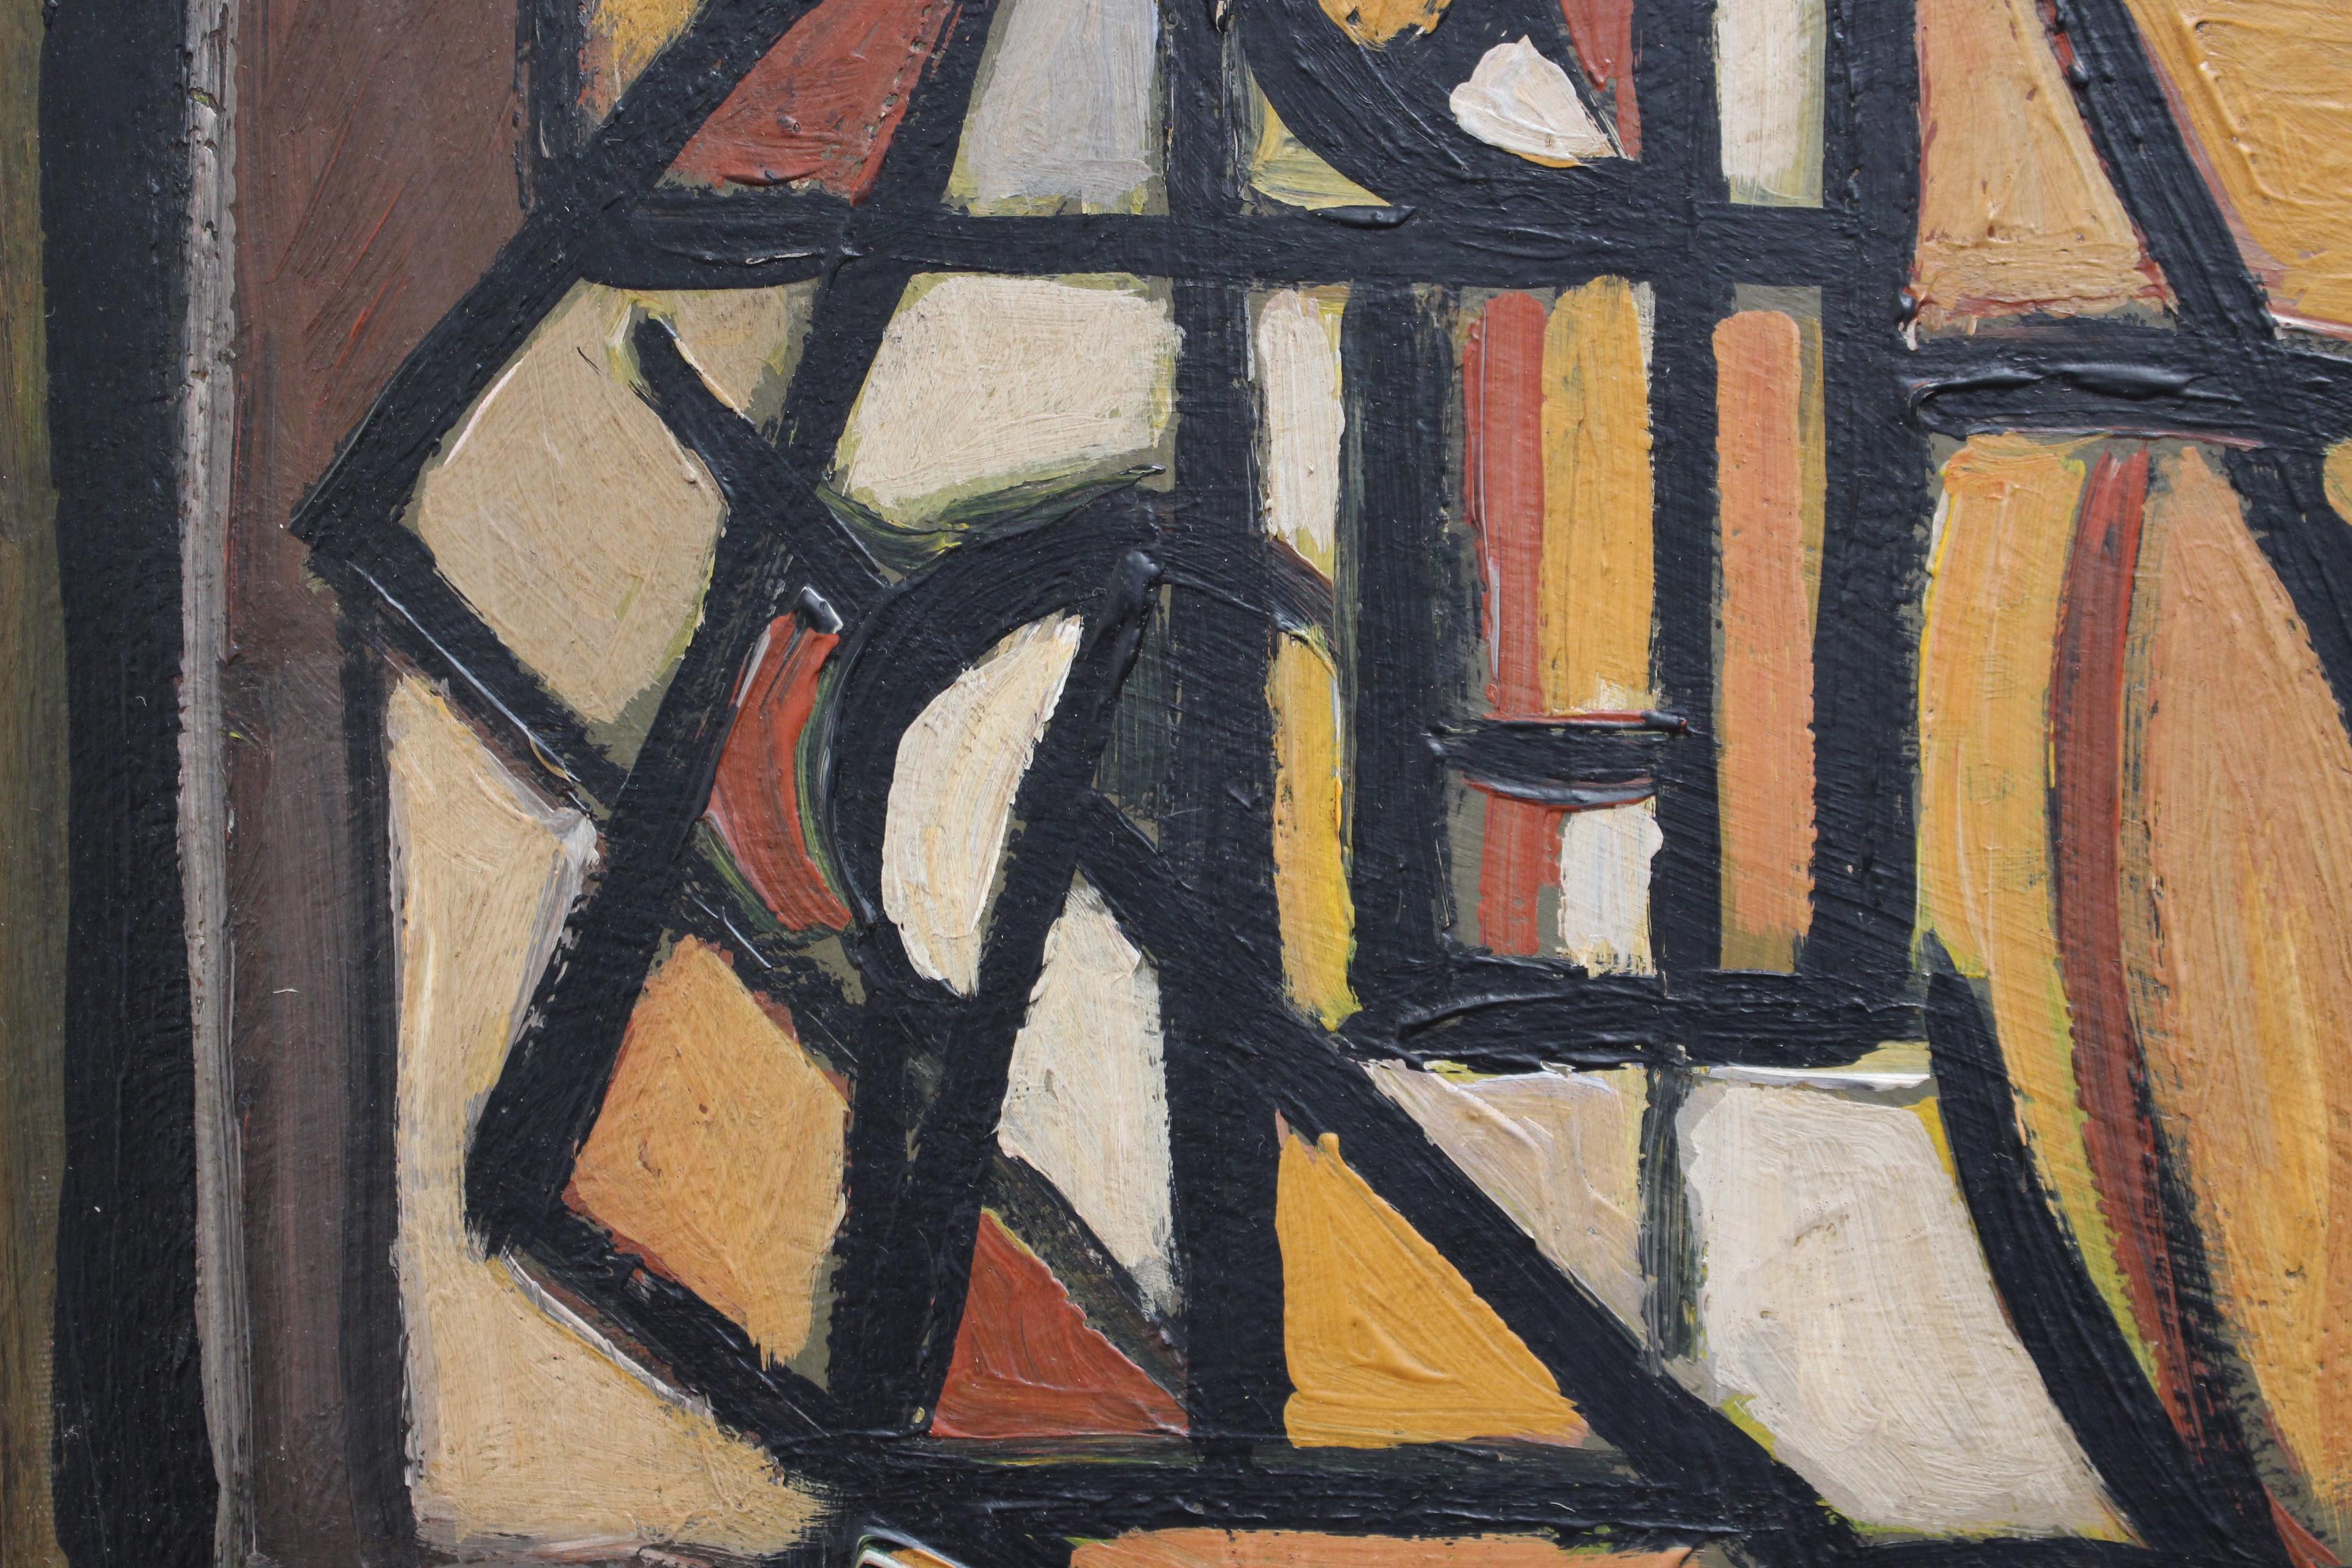 Cubist Figure 2, oil on board, by STM (circa 1960s - 70s). A stunning Modern painting in a small series of two works by artist with the initials STM. Clearly inspired by Picasso and Braque, the artist used angles, lines and vibrant colours to create